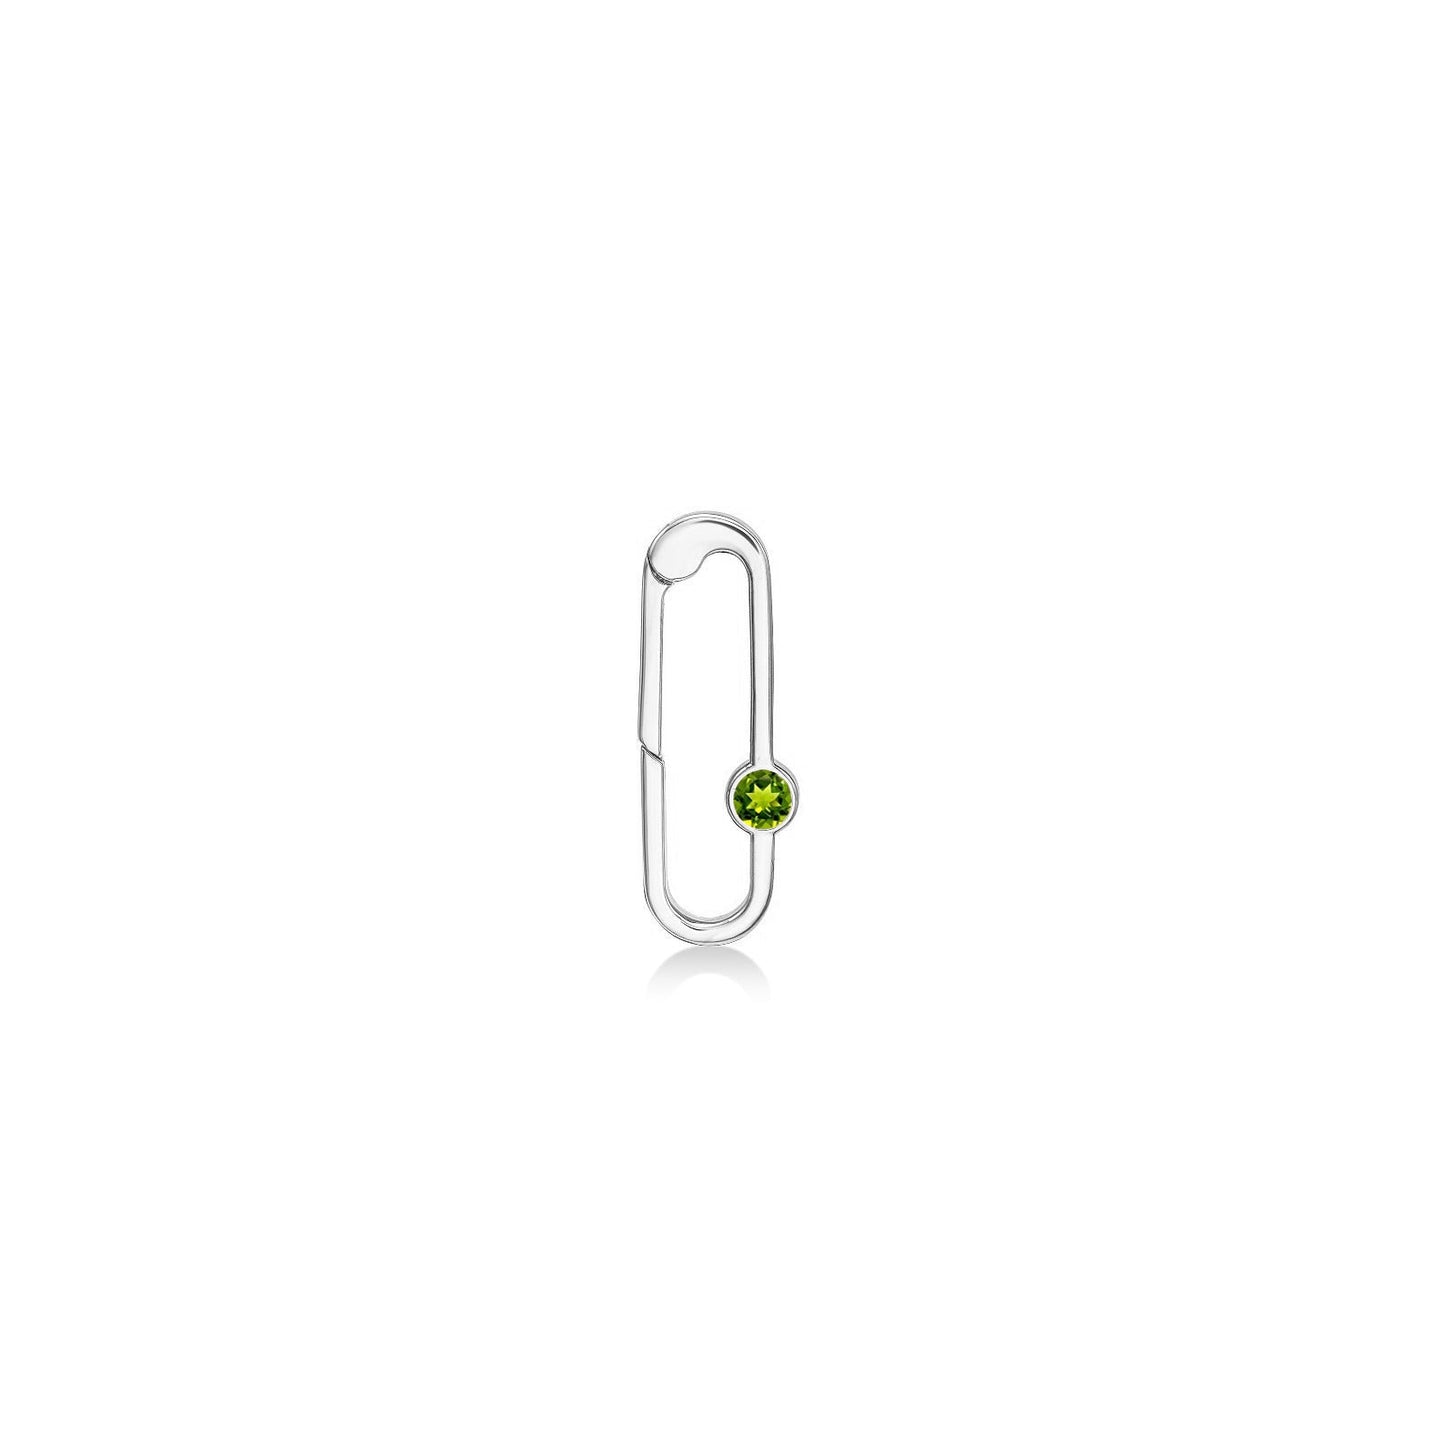 14k white gold paperclip charm lock with peridot